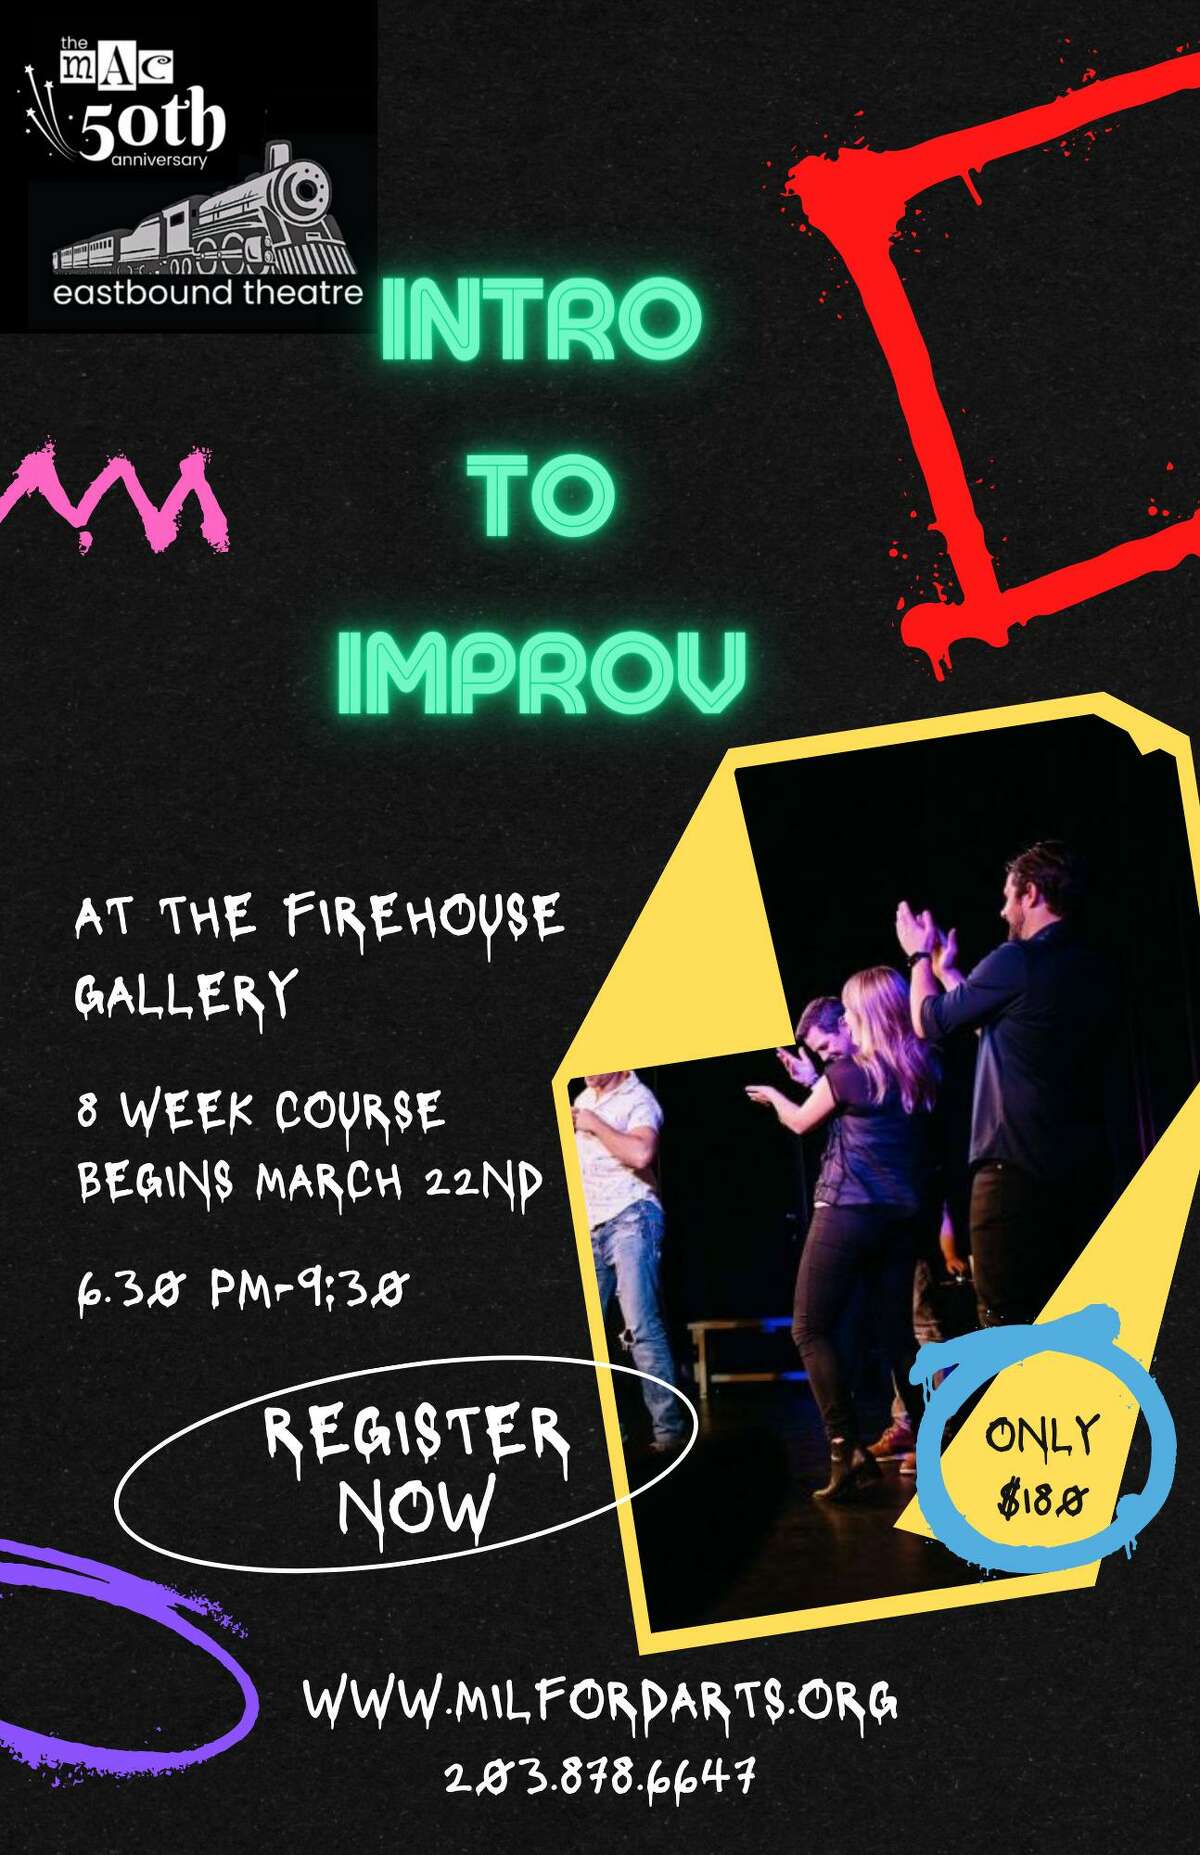 The Milford Arts Council, The MAC’s, Eastbound Theater has announced its eight week Intro to Improv course. A flyer for the class, is shown.